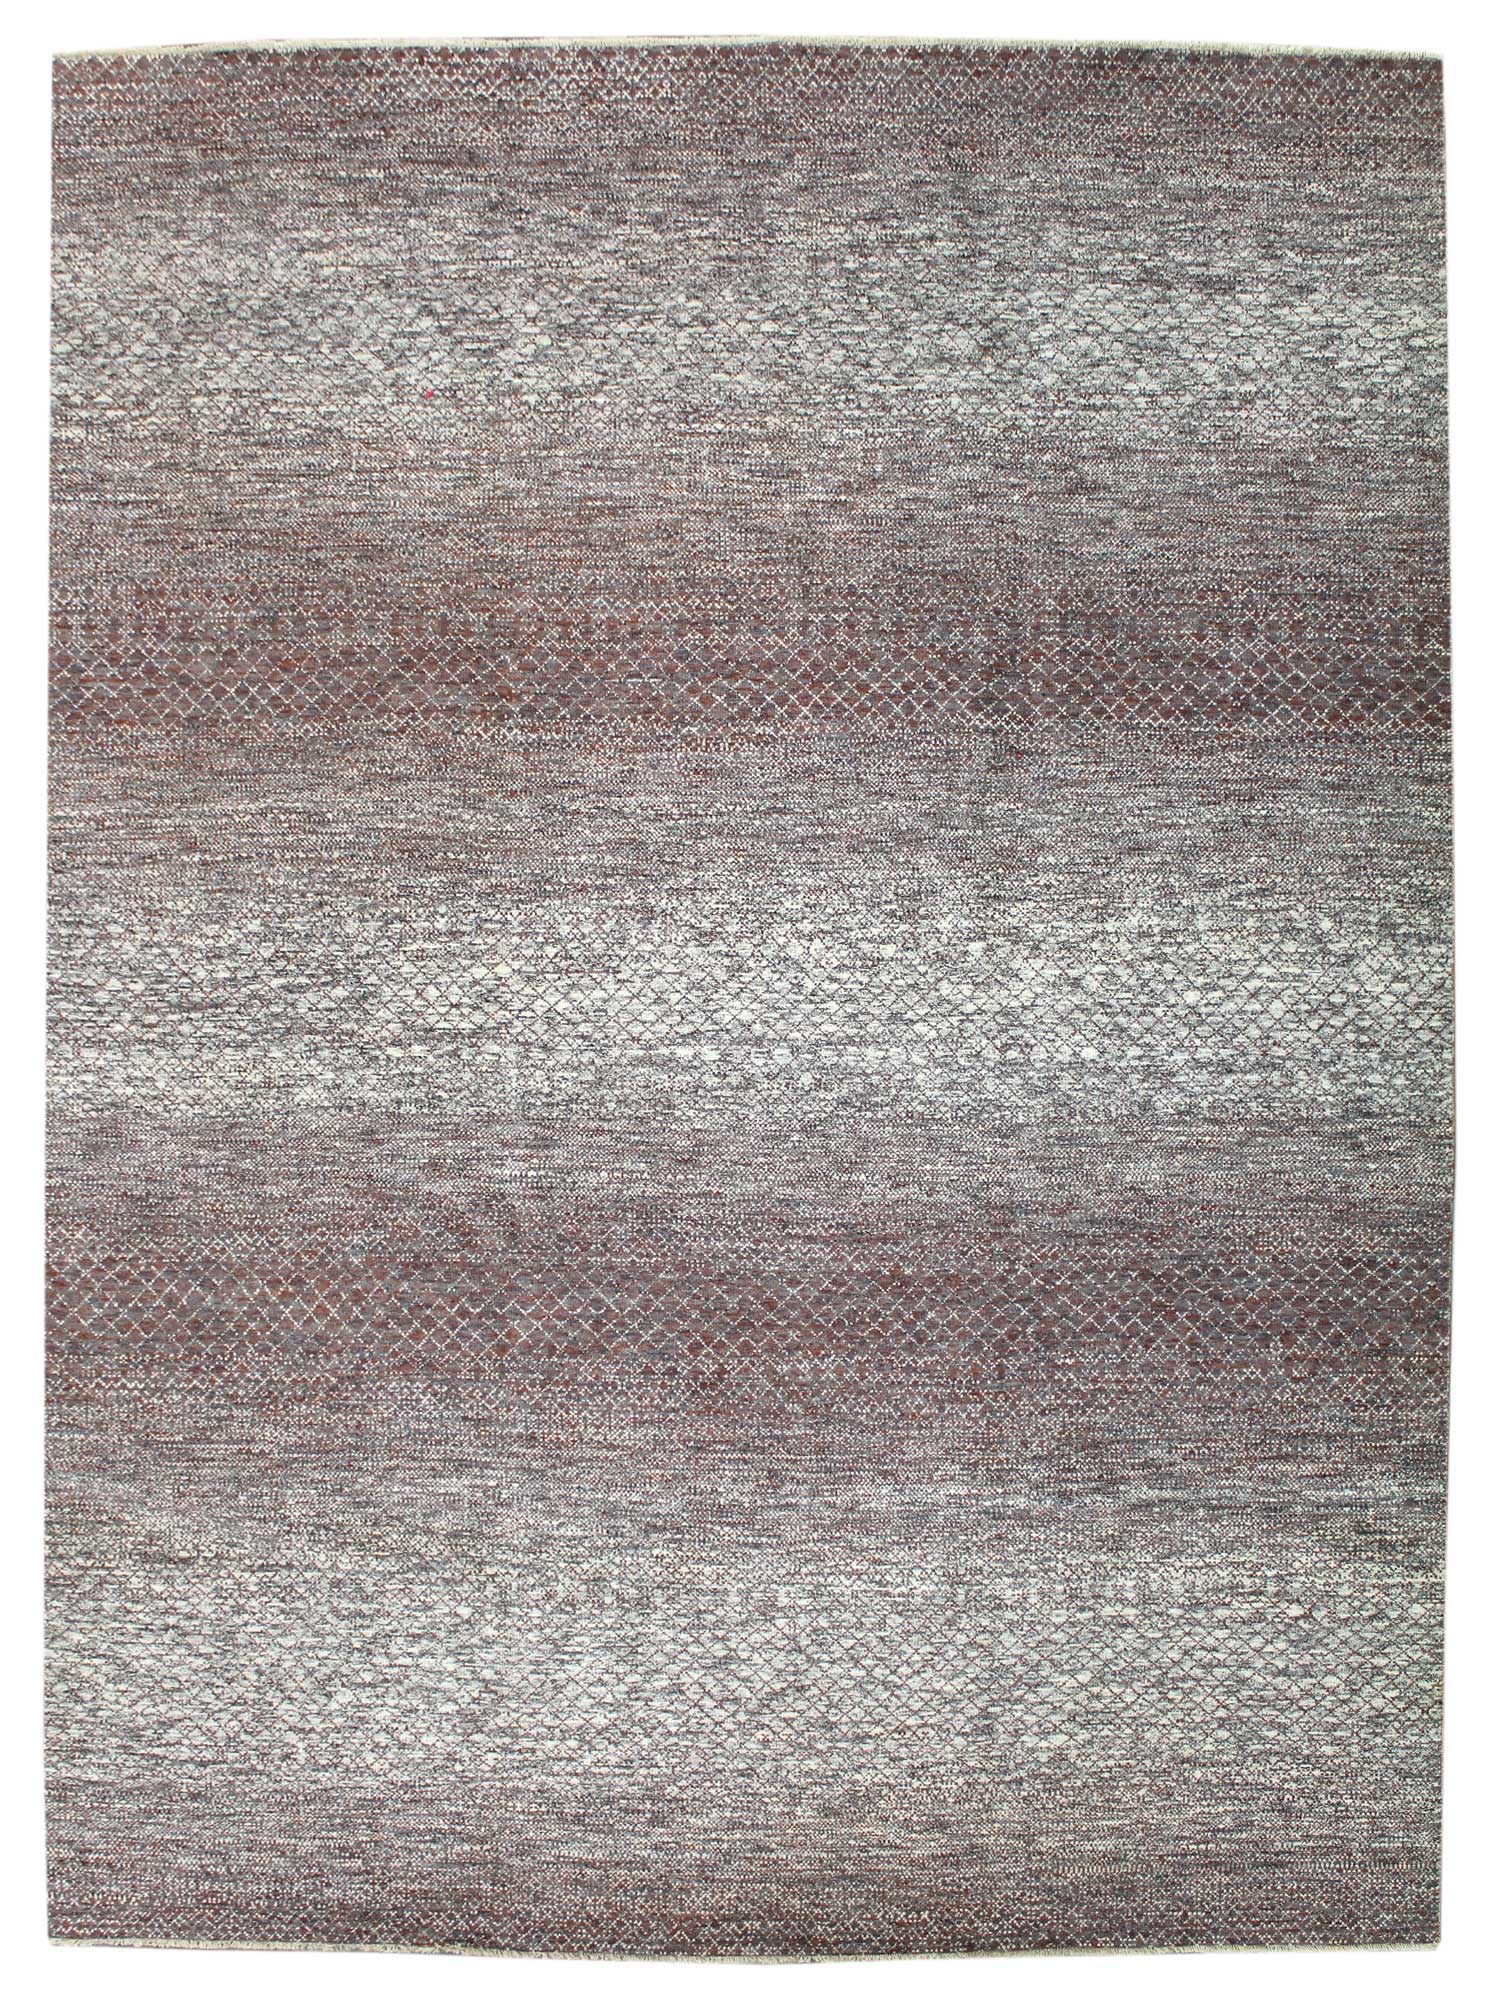 Sun And Sand Handwoven Contemporary Rug